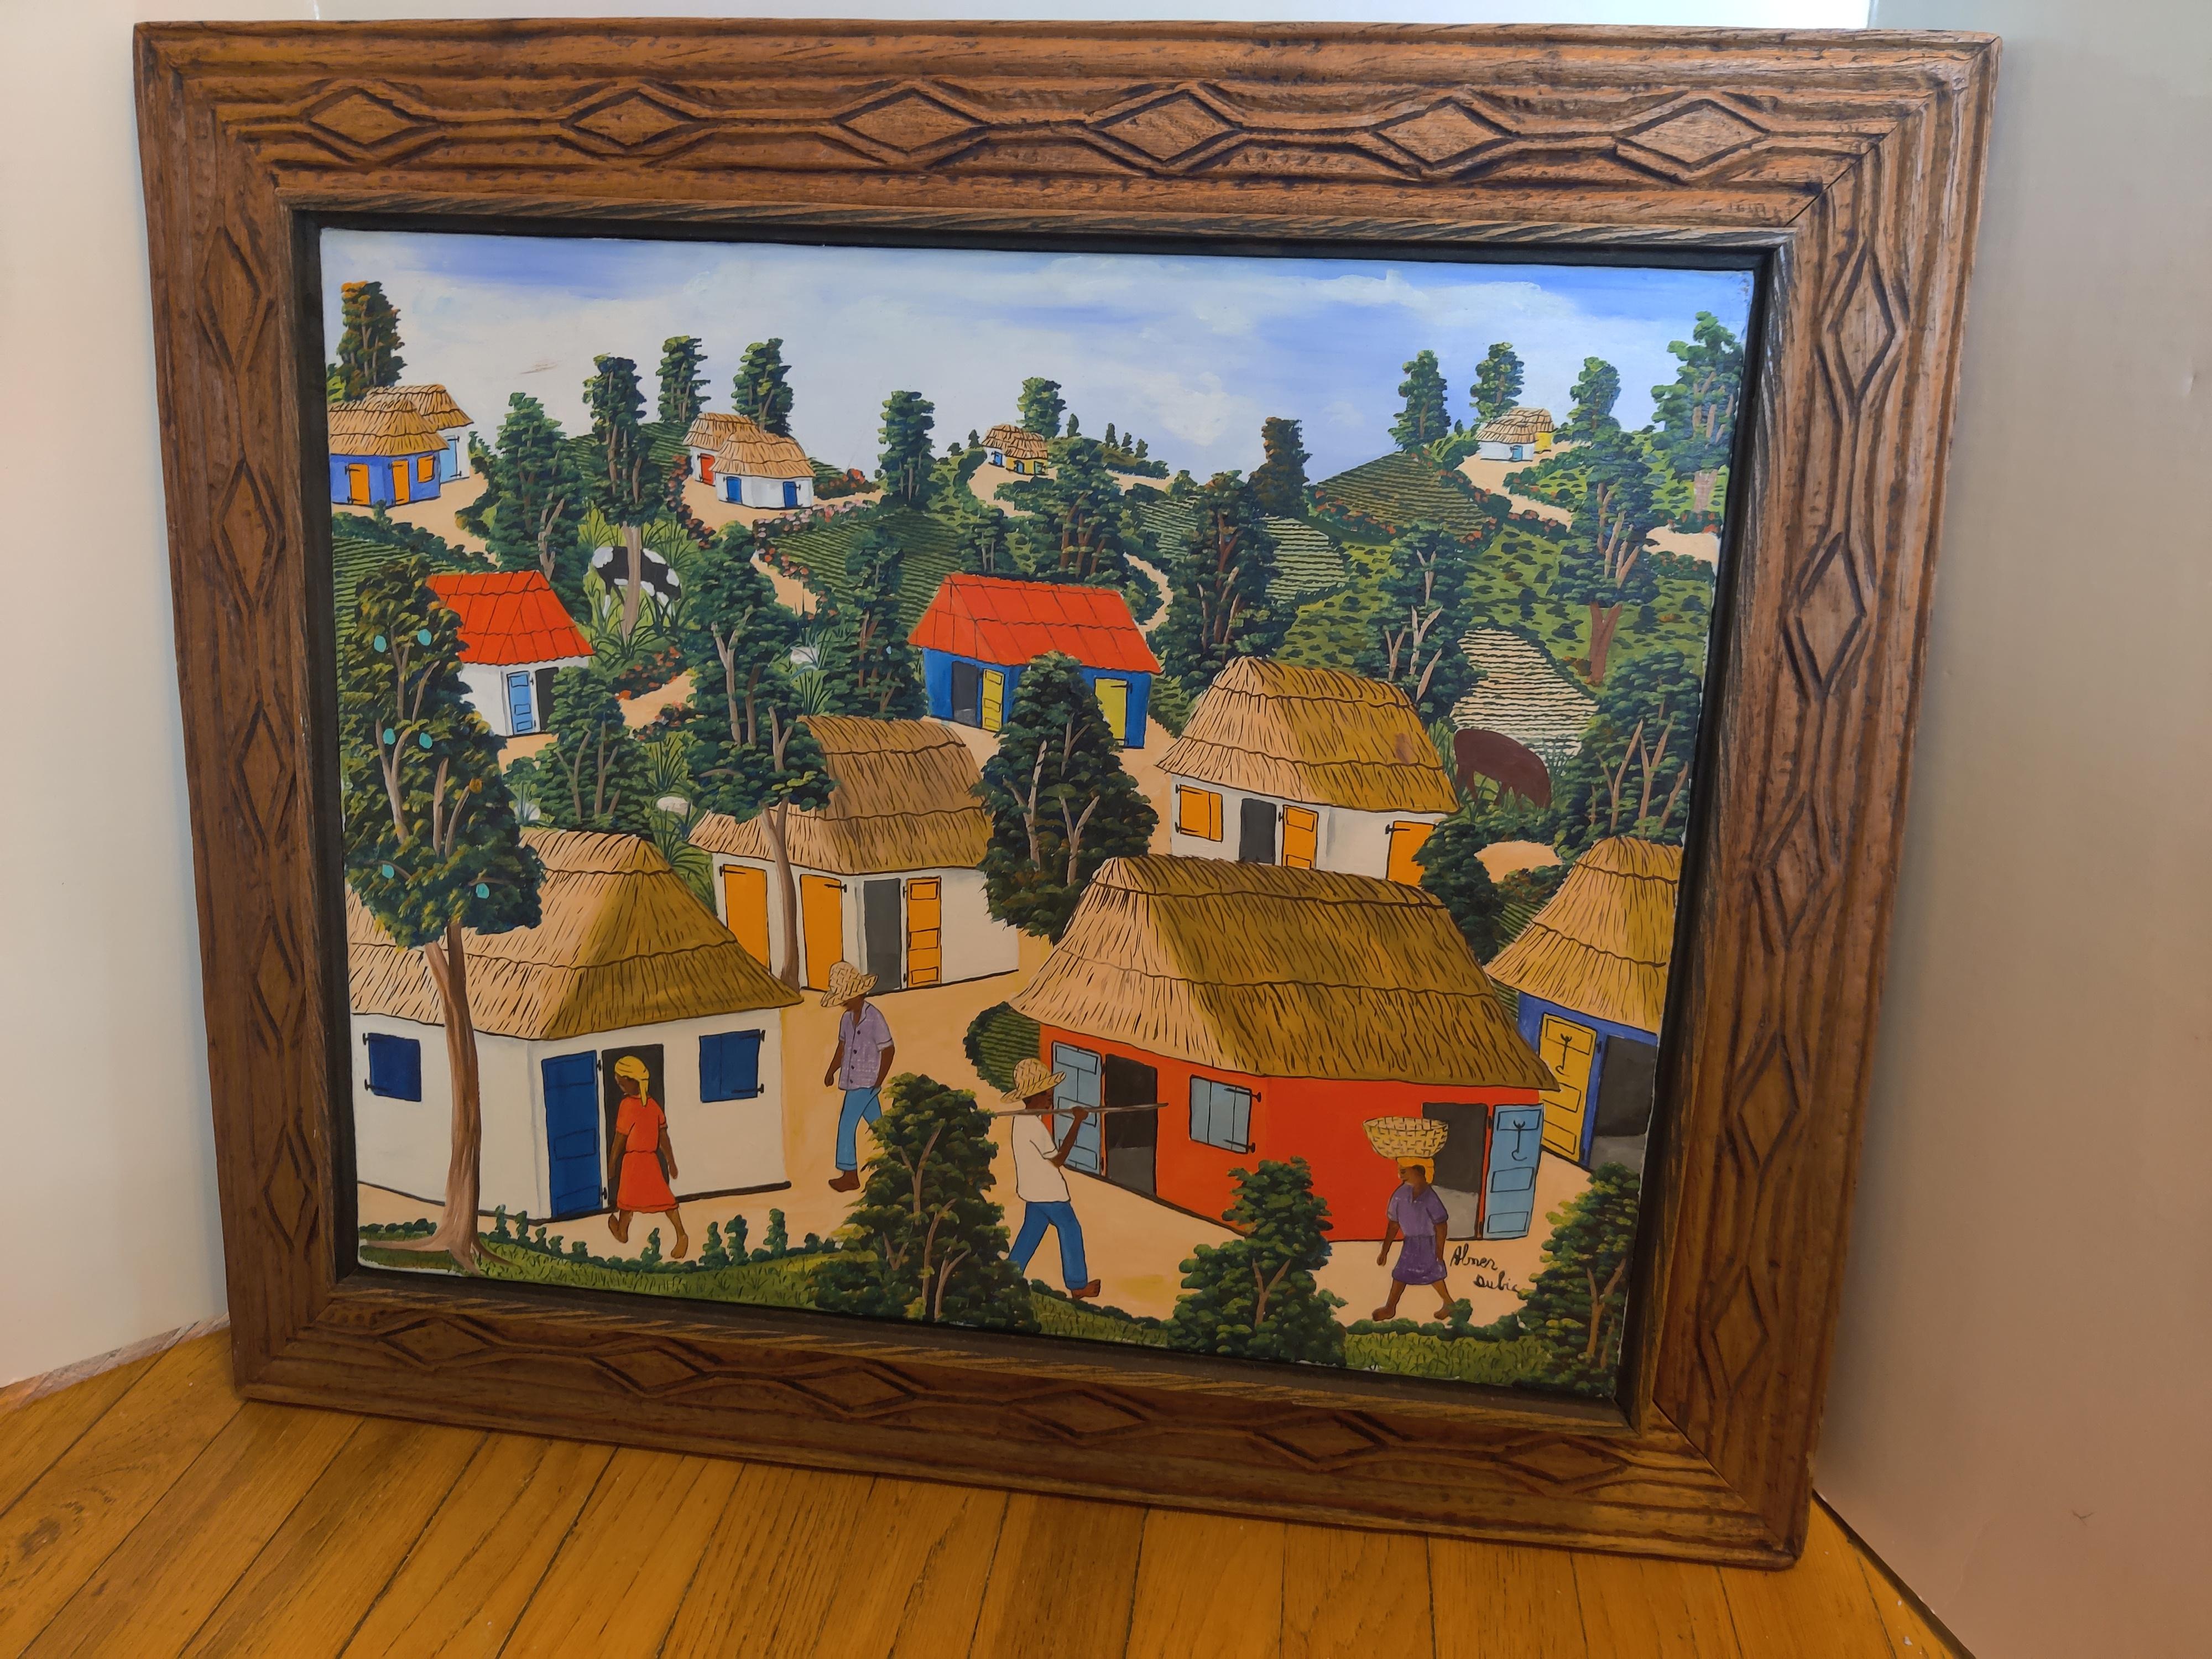 Abner Dubic original signed painting of Haiti Village.
Dubic was born 1944 in Haiti.  Started painting in 1966.   Exhibitions in Paris, Strasbourg, and US.   
His art represents life in the country, farm work and festivities in Haiti.
Rustic carved